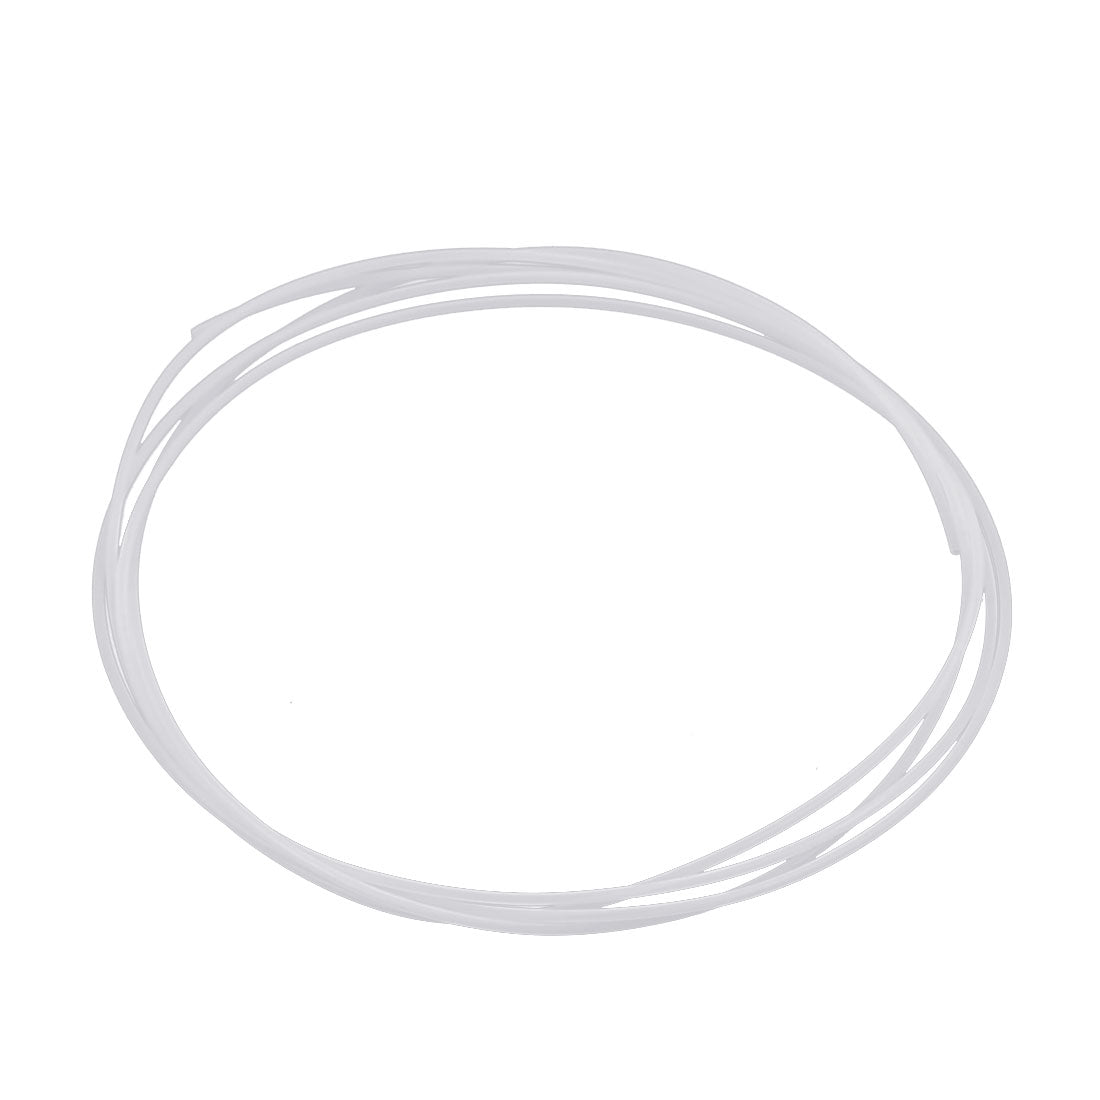 uxcell Uxcell 0.6mm x 1mm PTFE High Lubricating Ability Tubing 1 Meters 3.3Ft for Electronics